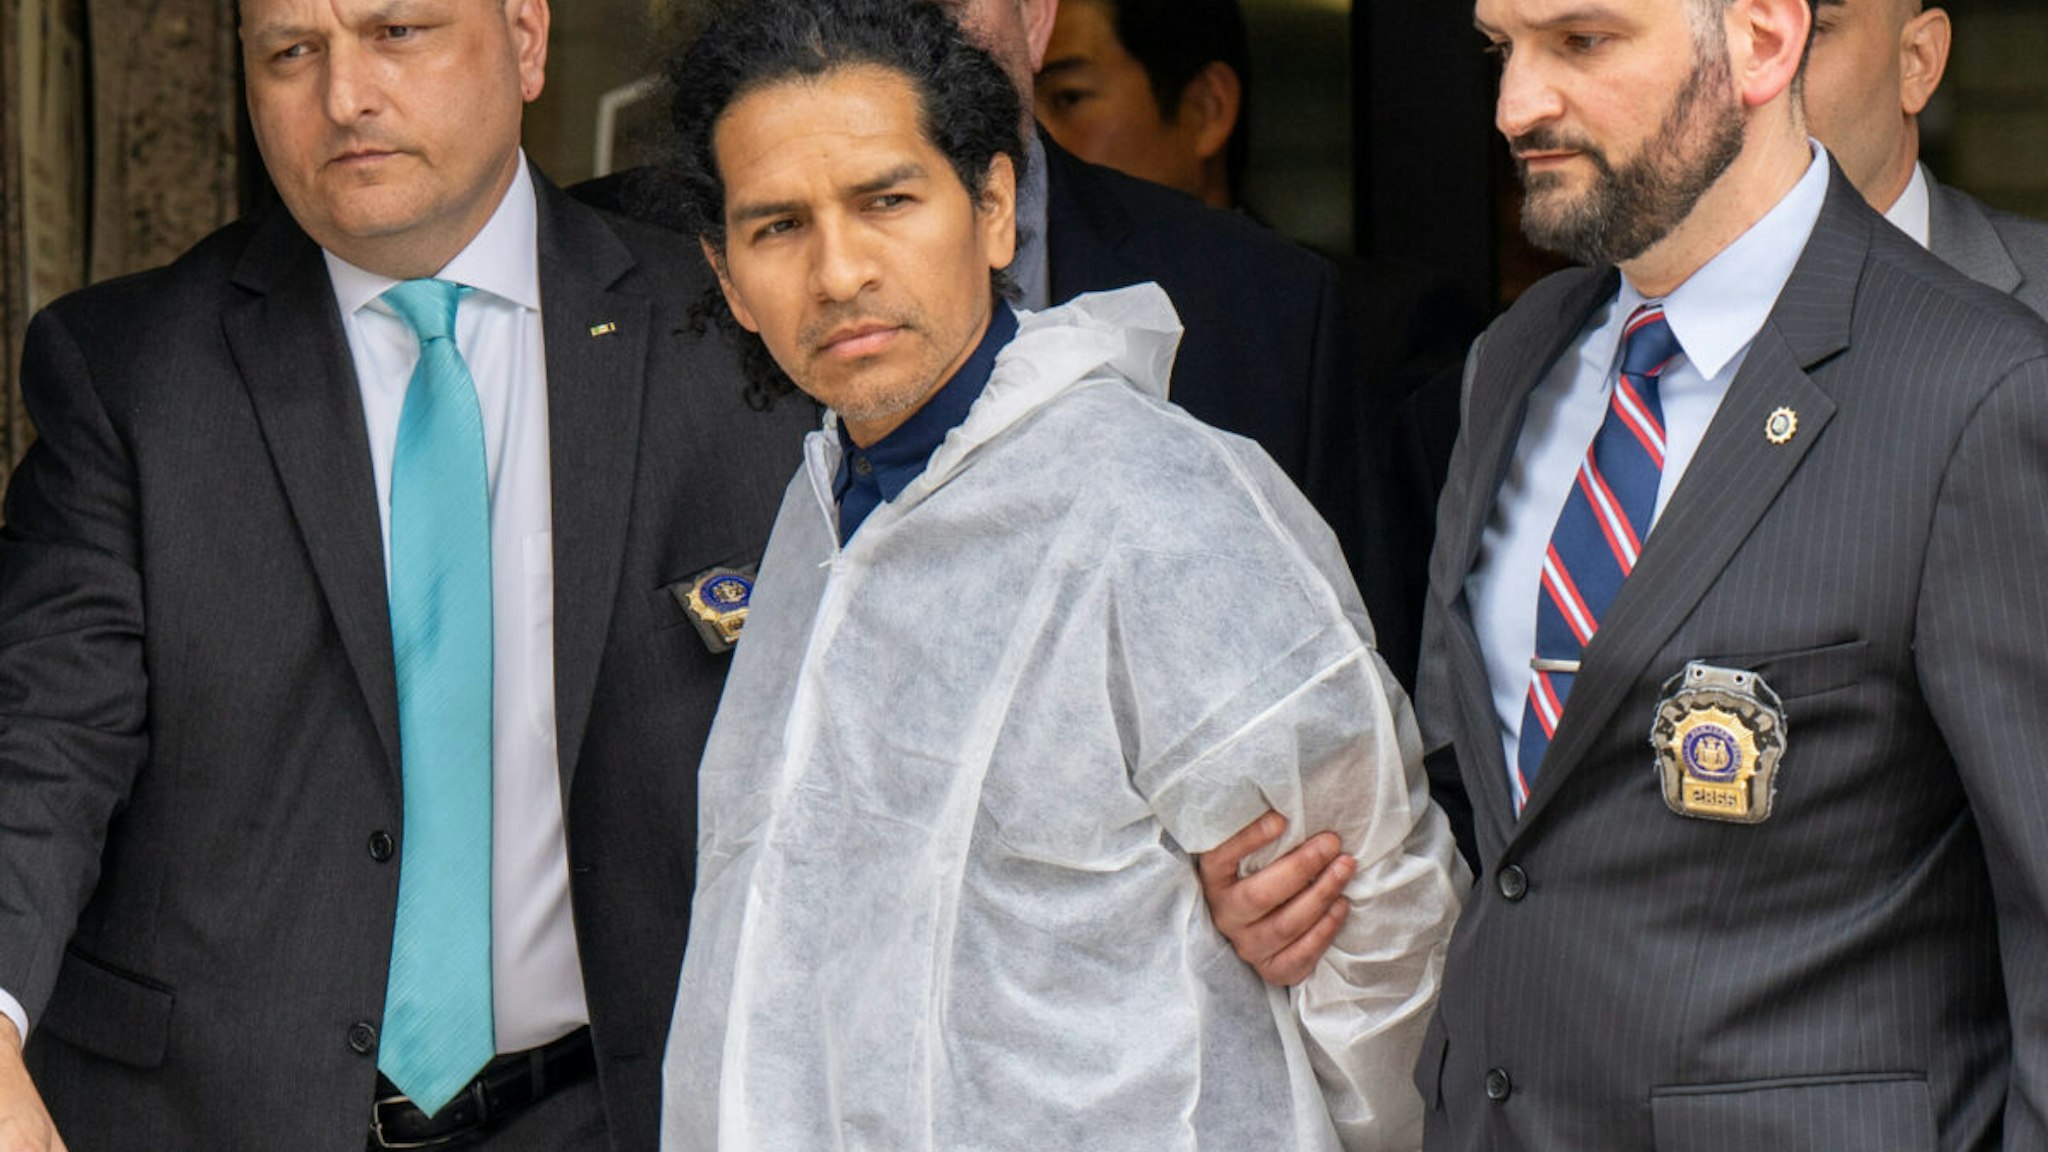 David Bonola, 44, a suspect in the gruesome multi stabbing murder of 51yr old Orsolya Gaal, is taken from the NYPD 112th Precinct Station House on Austin Street in Queens on Thursday April 21, 2022